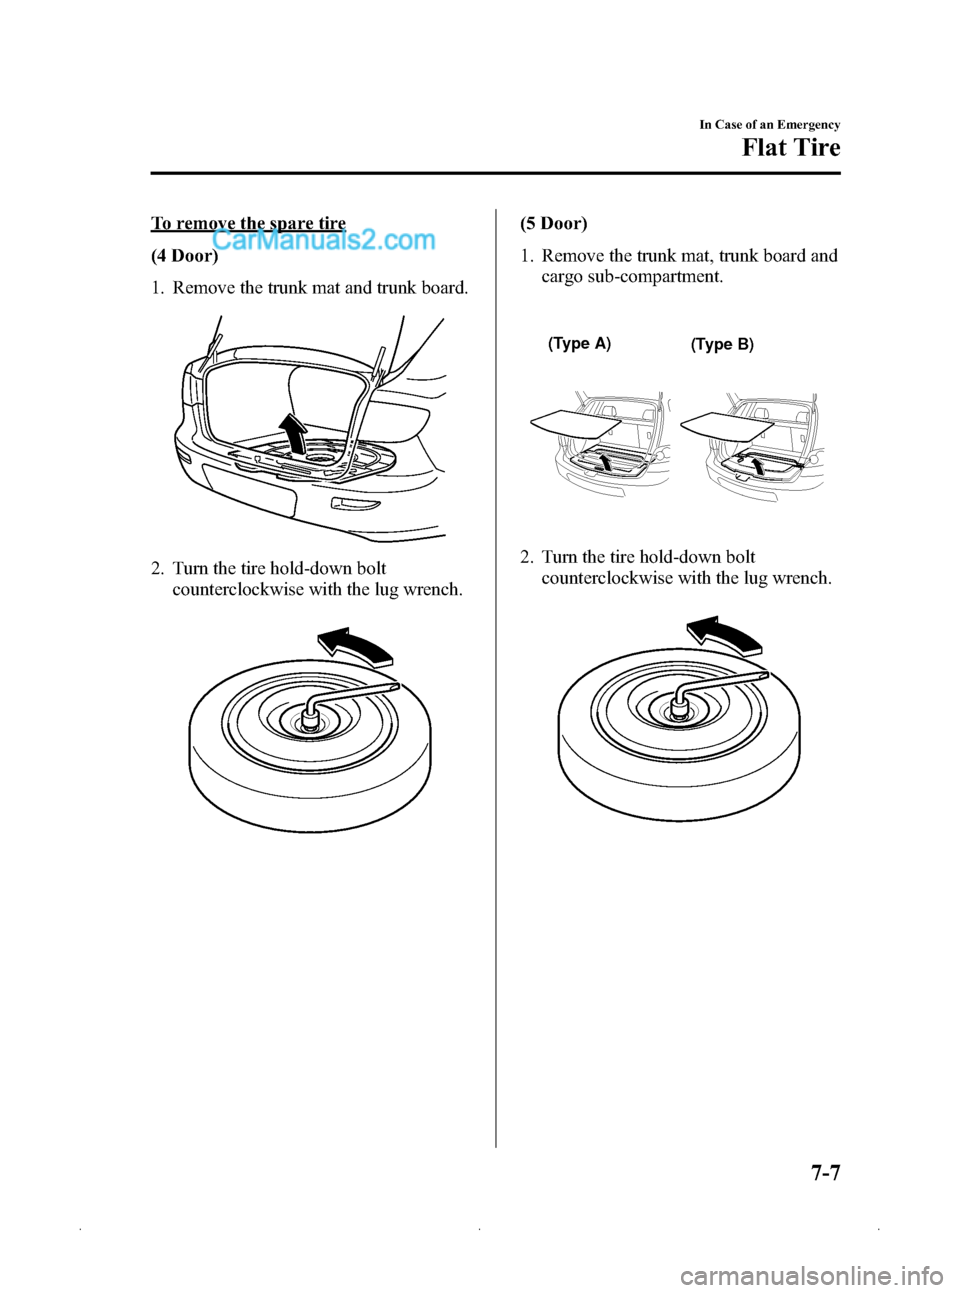 MAZDA MODEL MAZDASPEED 3 2009   (in English) User Guide Black plate (269,1)
To remove the spare tire
(4 Door)
1. Remove the trunk mat and trunk board.
2. Turn the tire hold-down boltcounterclockwise with the lug wrench.
(5 Door)
1. Remove the trunk mat, tr